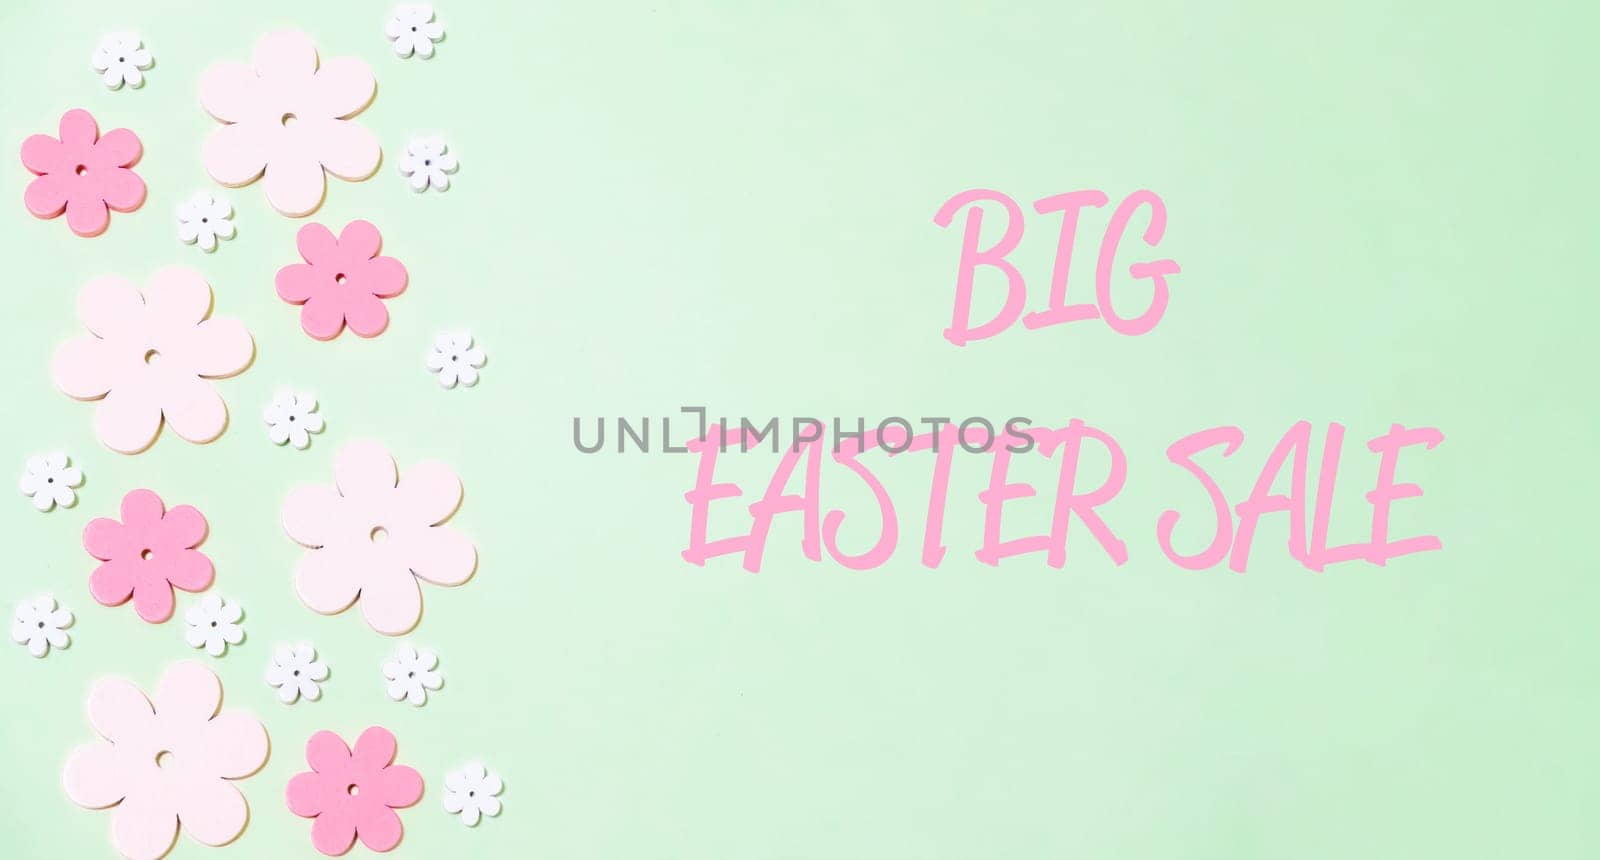 text Big easter sale on a pink background by Alla_Morozova93